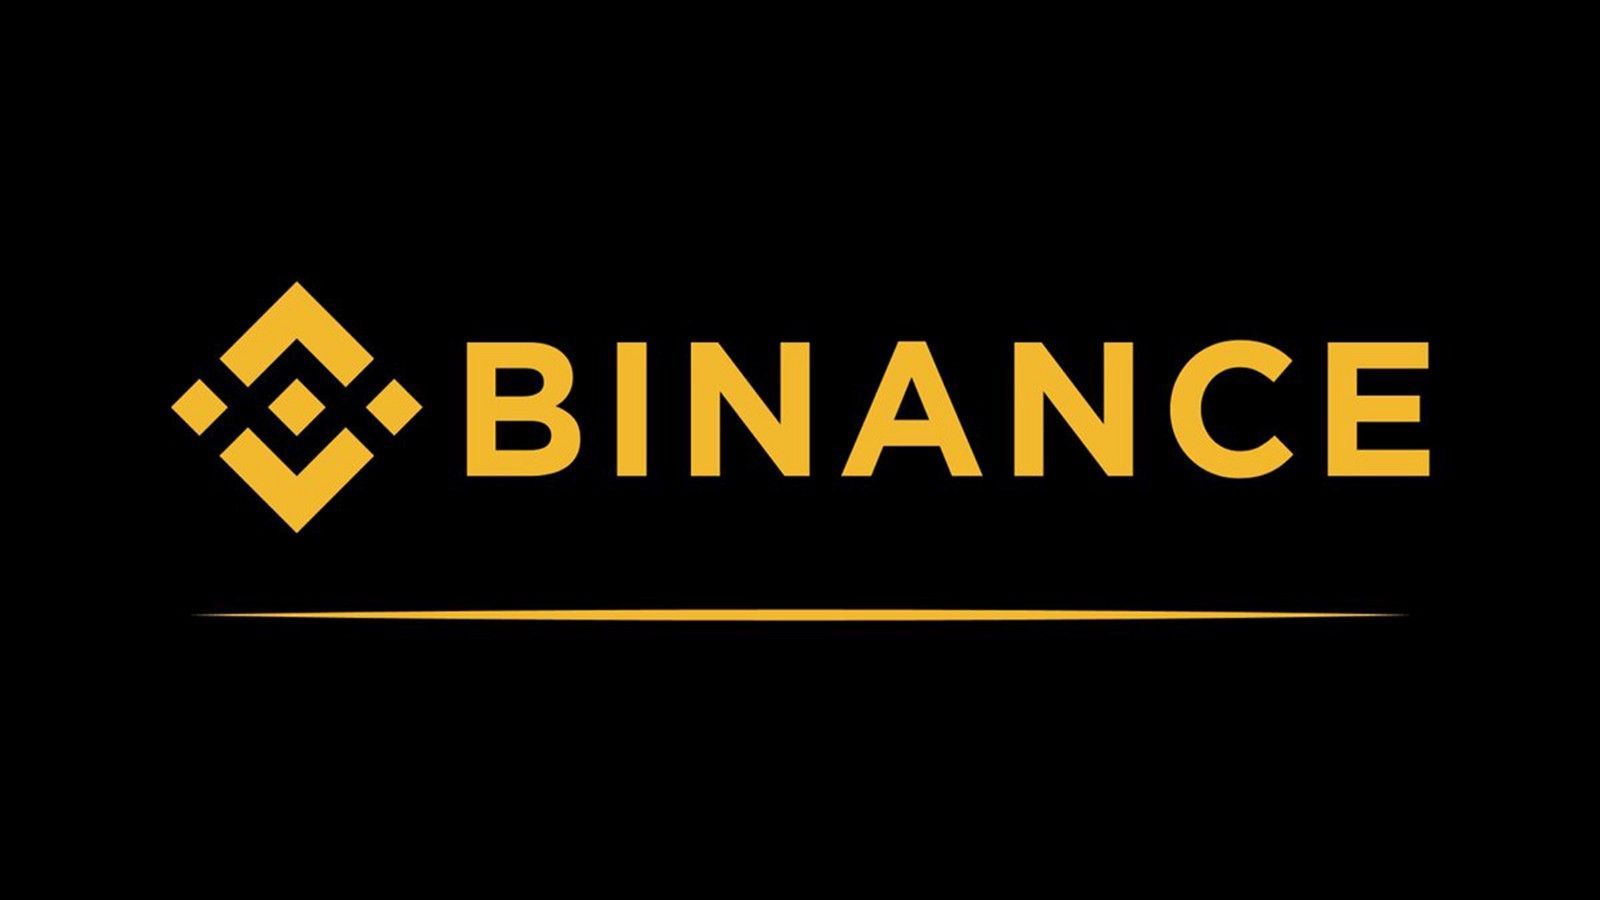 Binance traders not anonymous, says crypto investigator